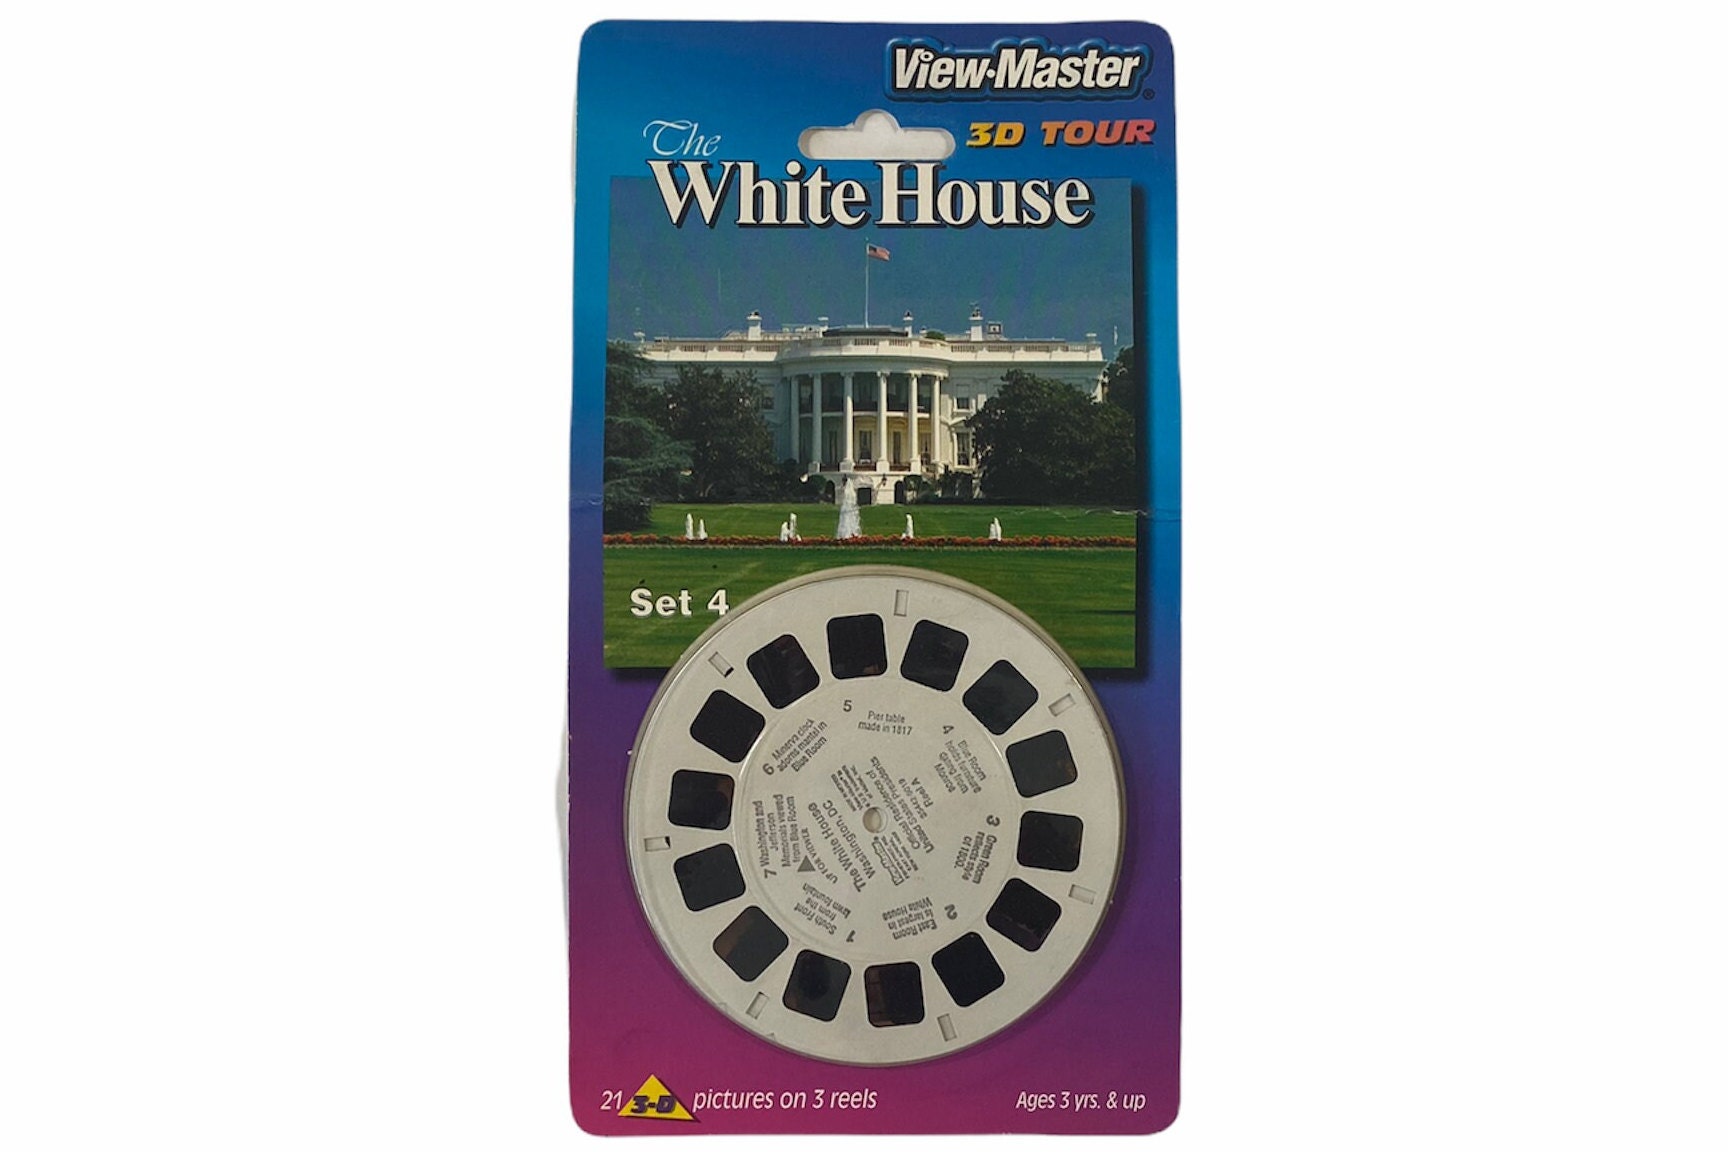 The WHITE HOUSE Washington, D.C. View-master Reel Set Fisher-price  Unopened, New Old Stock 2000 -  Canada